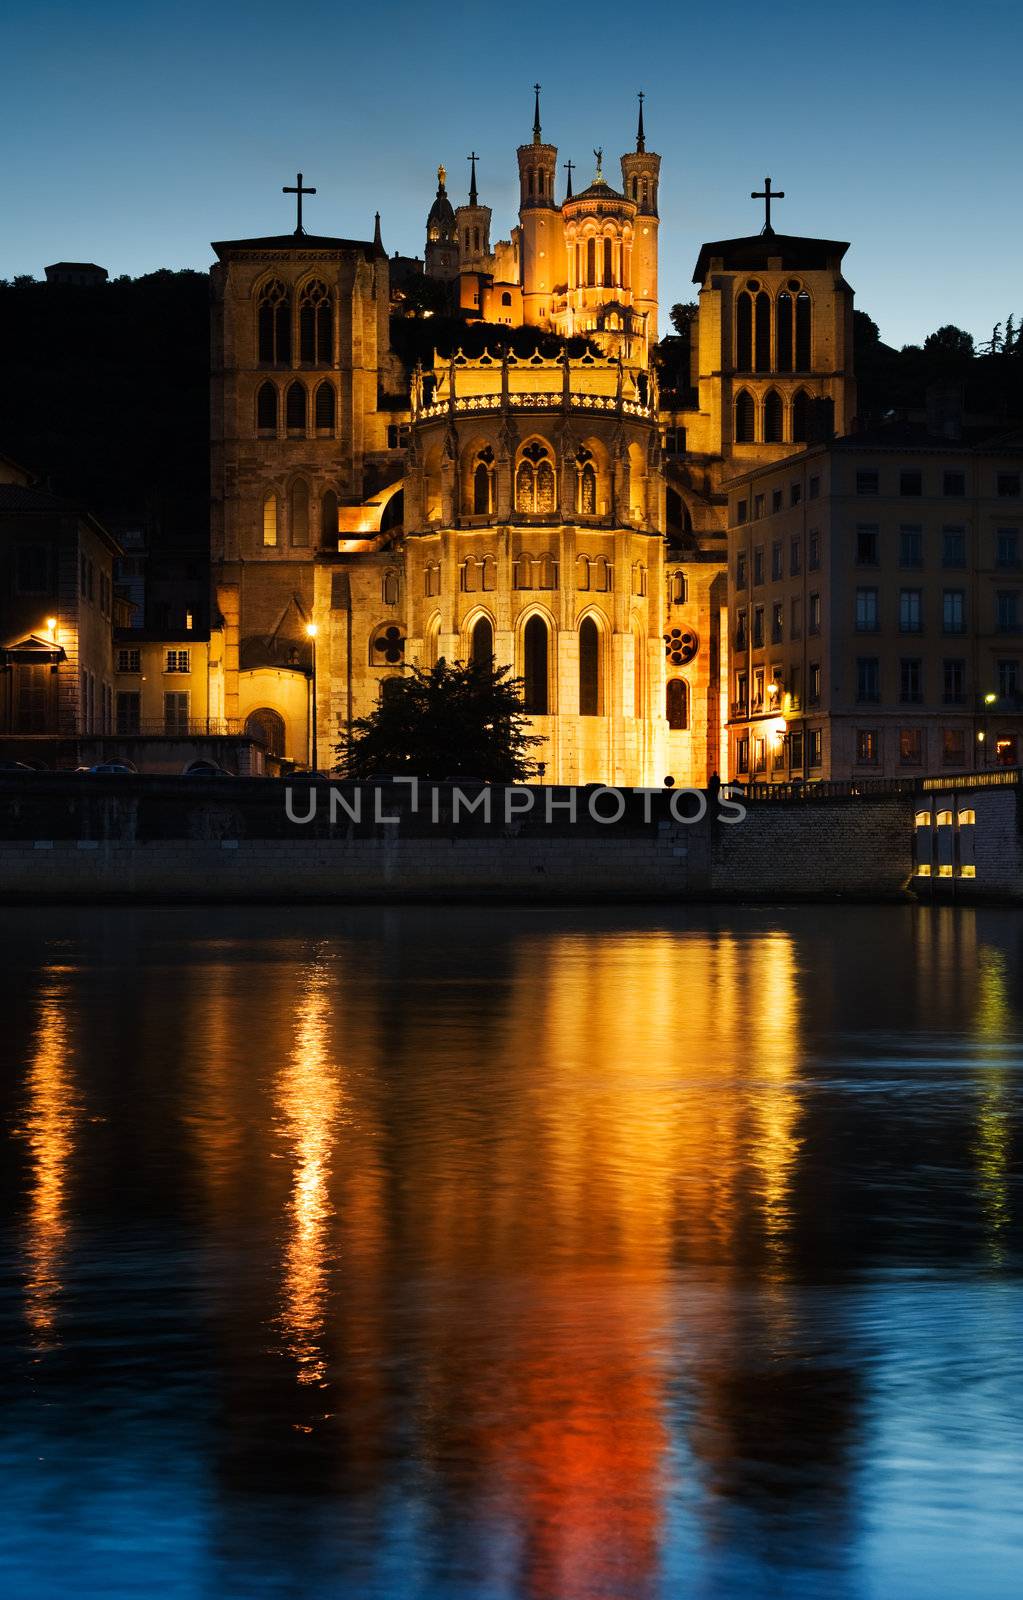 Early evening picture of the Notre Dame de Fourviere basilica and the St. Jean cathedral both illuminated and reflected on the waters of the river Saone, in Lyon, France